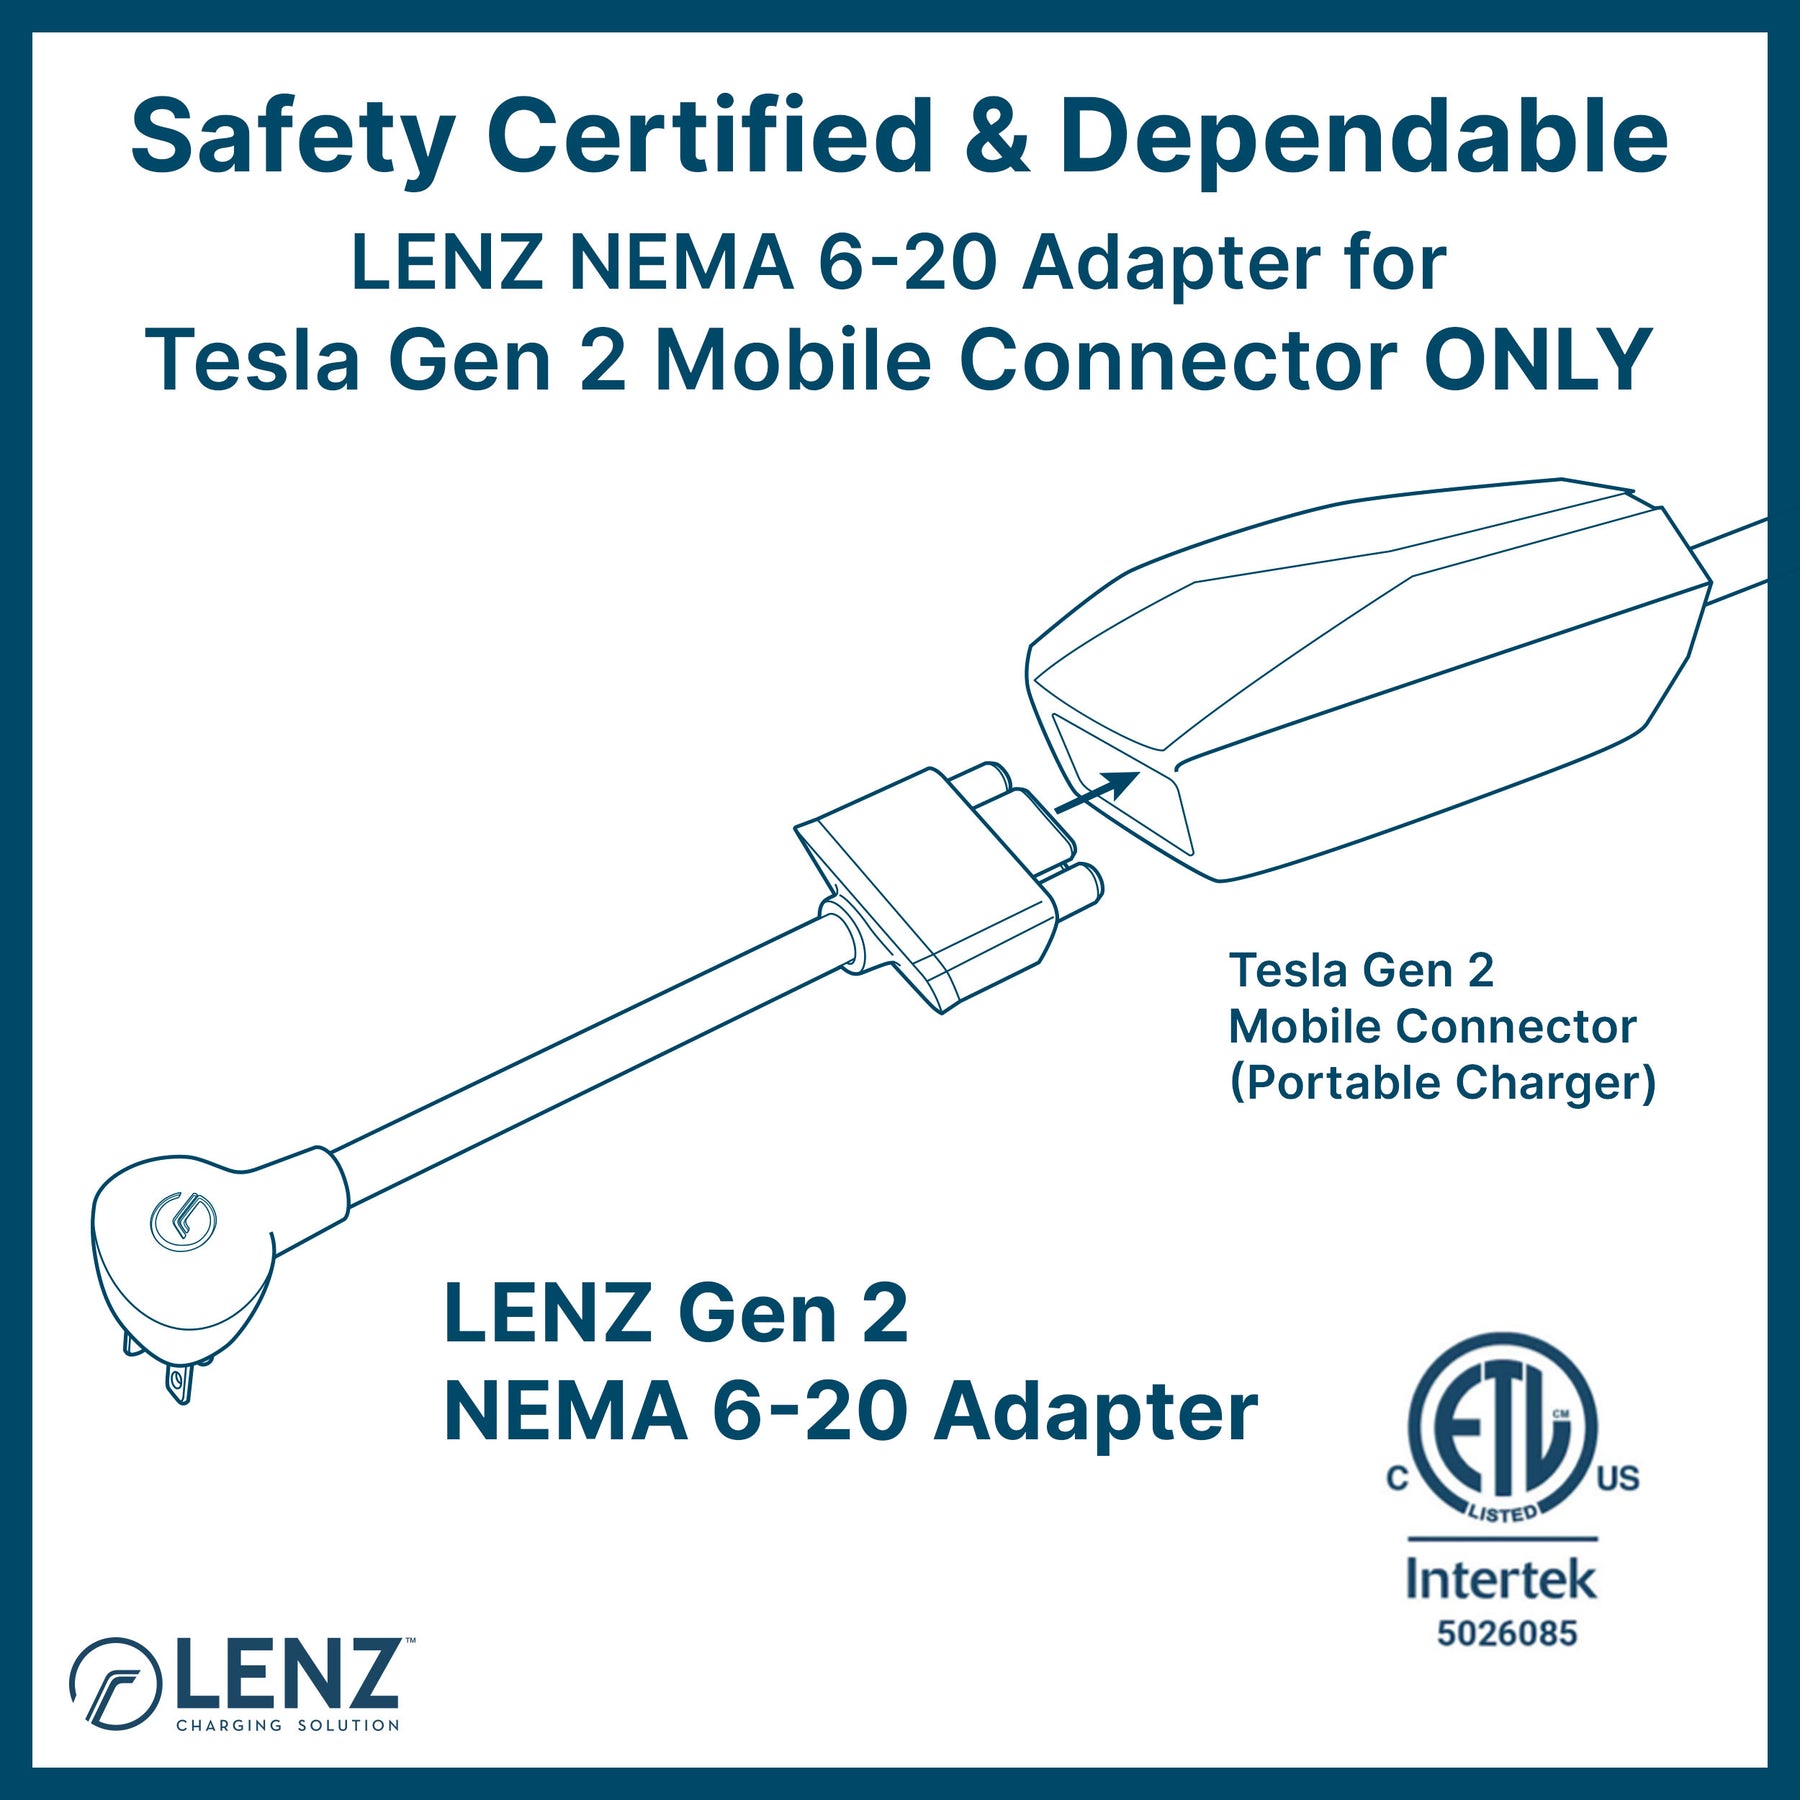 LENZ NEMA 6-20 Adapter is safety tested and certified by ETL (Intertek 5026085) and compatible with Tesla Gen 2 Mobile Connector ONLY